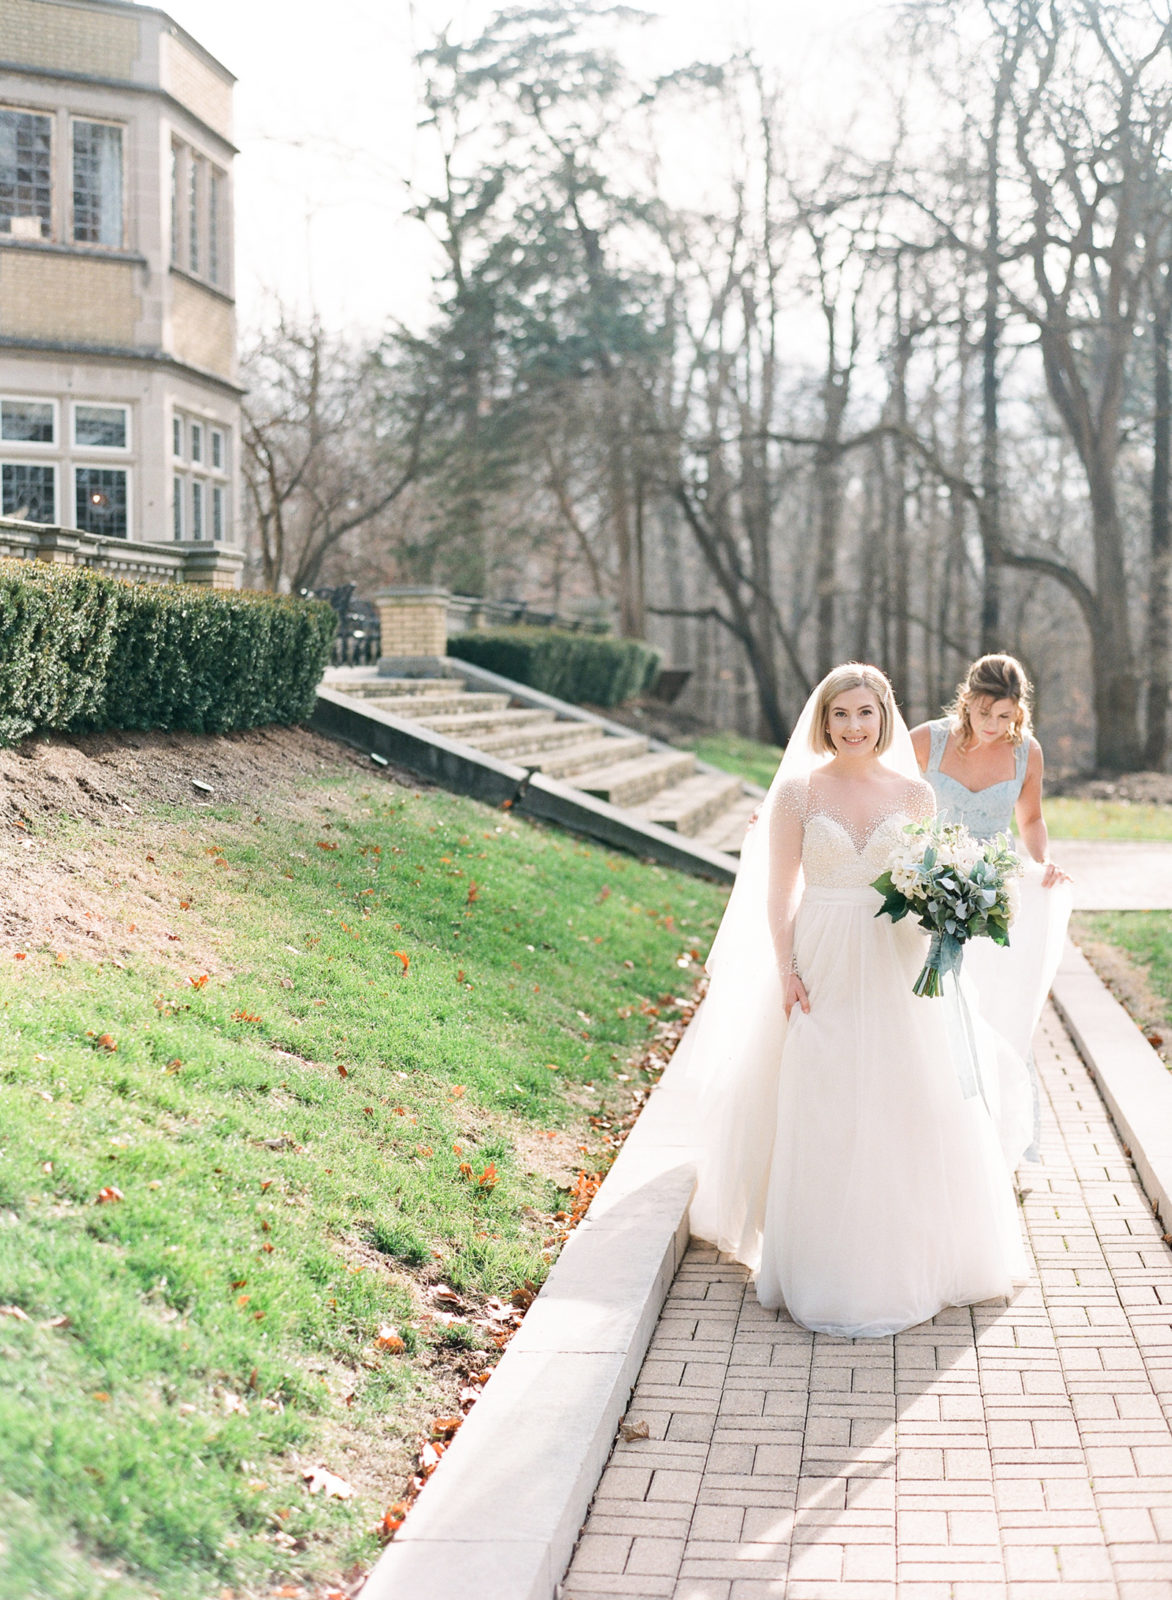 Laurel Hall Wedding Photographer | Estate Wedding Venue | Midwest Film Photographer | Molly Carr Photography | Bride Walking to First Look